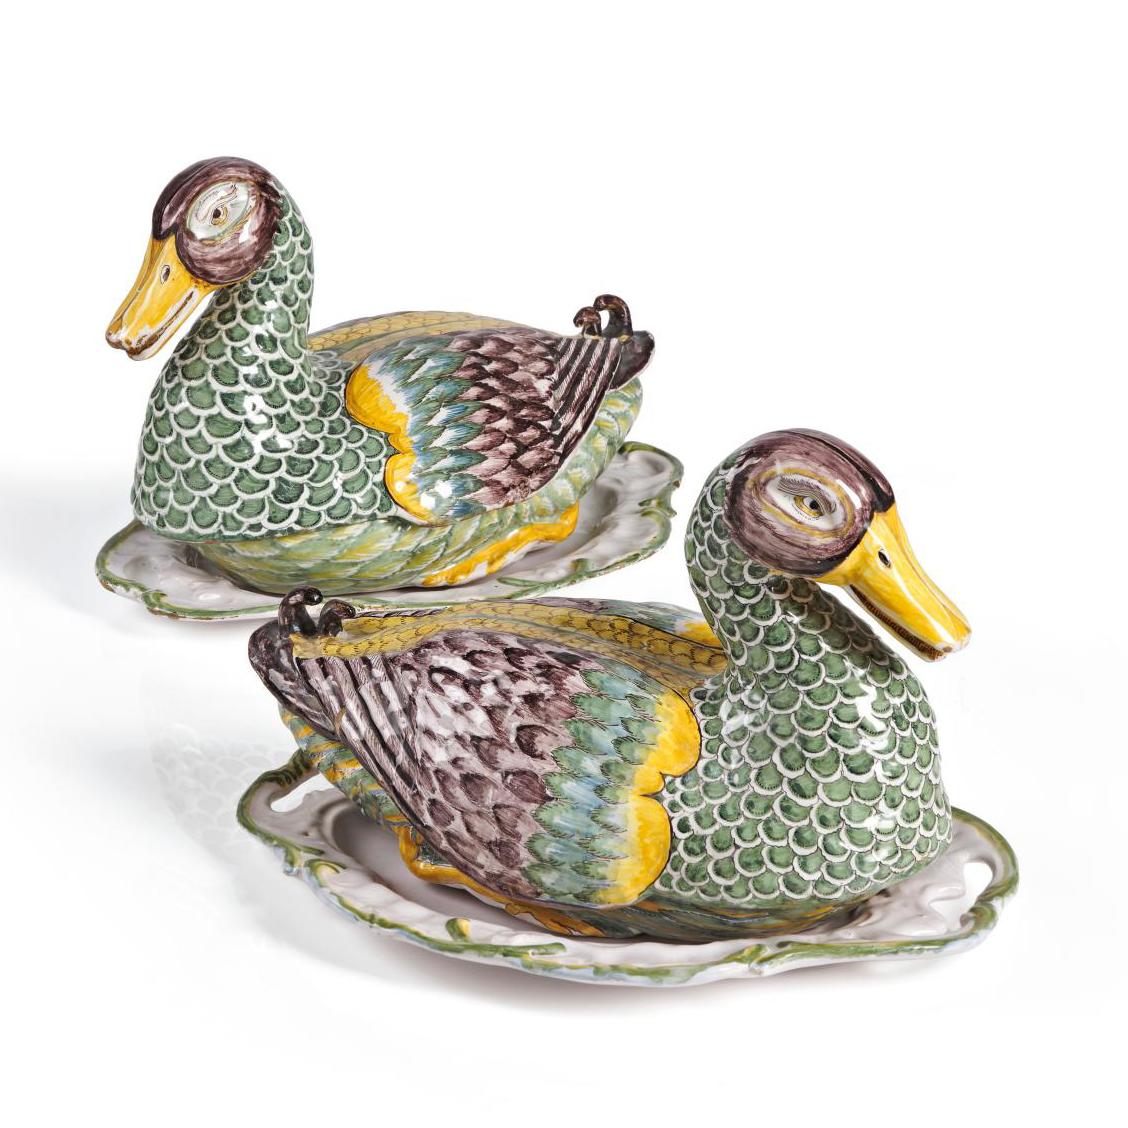 Faience Ducks in the Marseilles Style  - Pre-sale